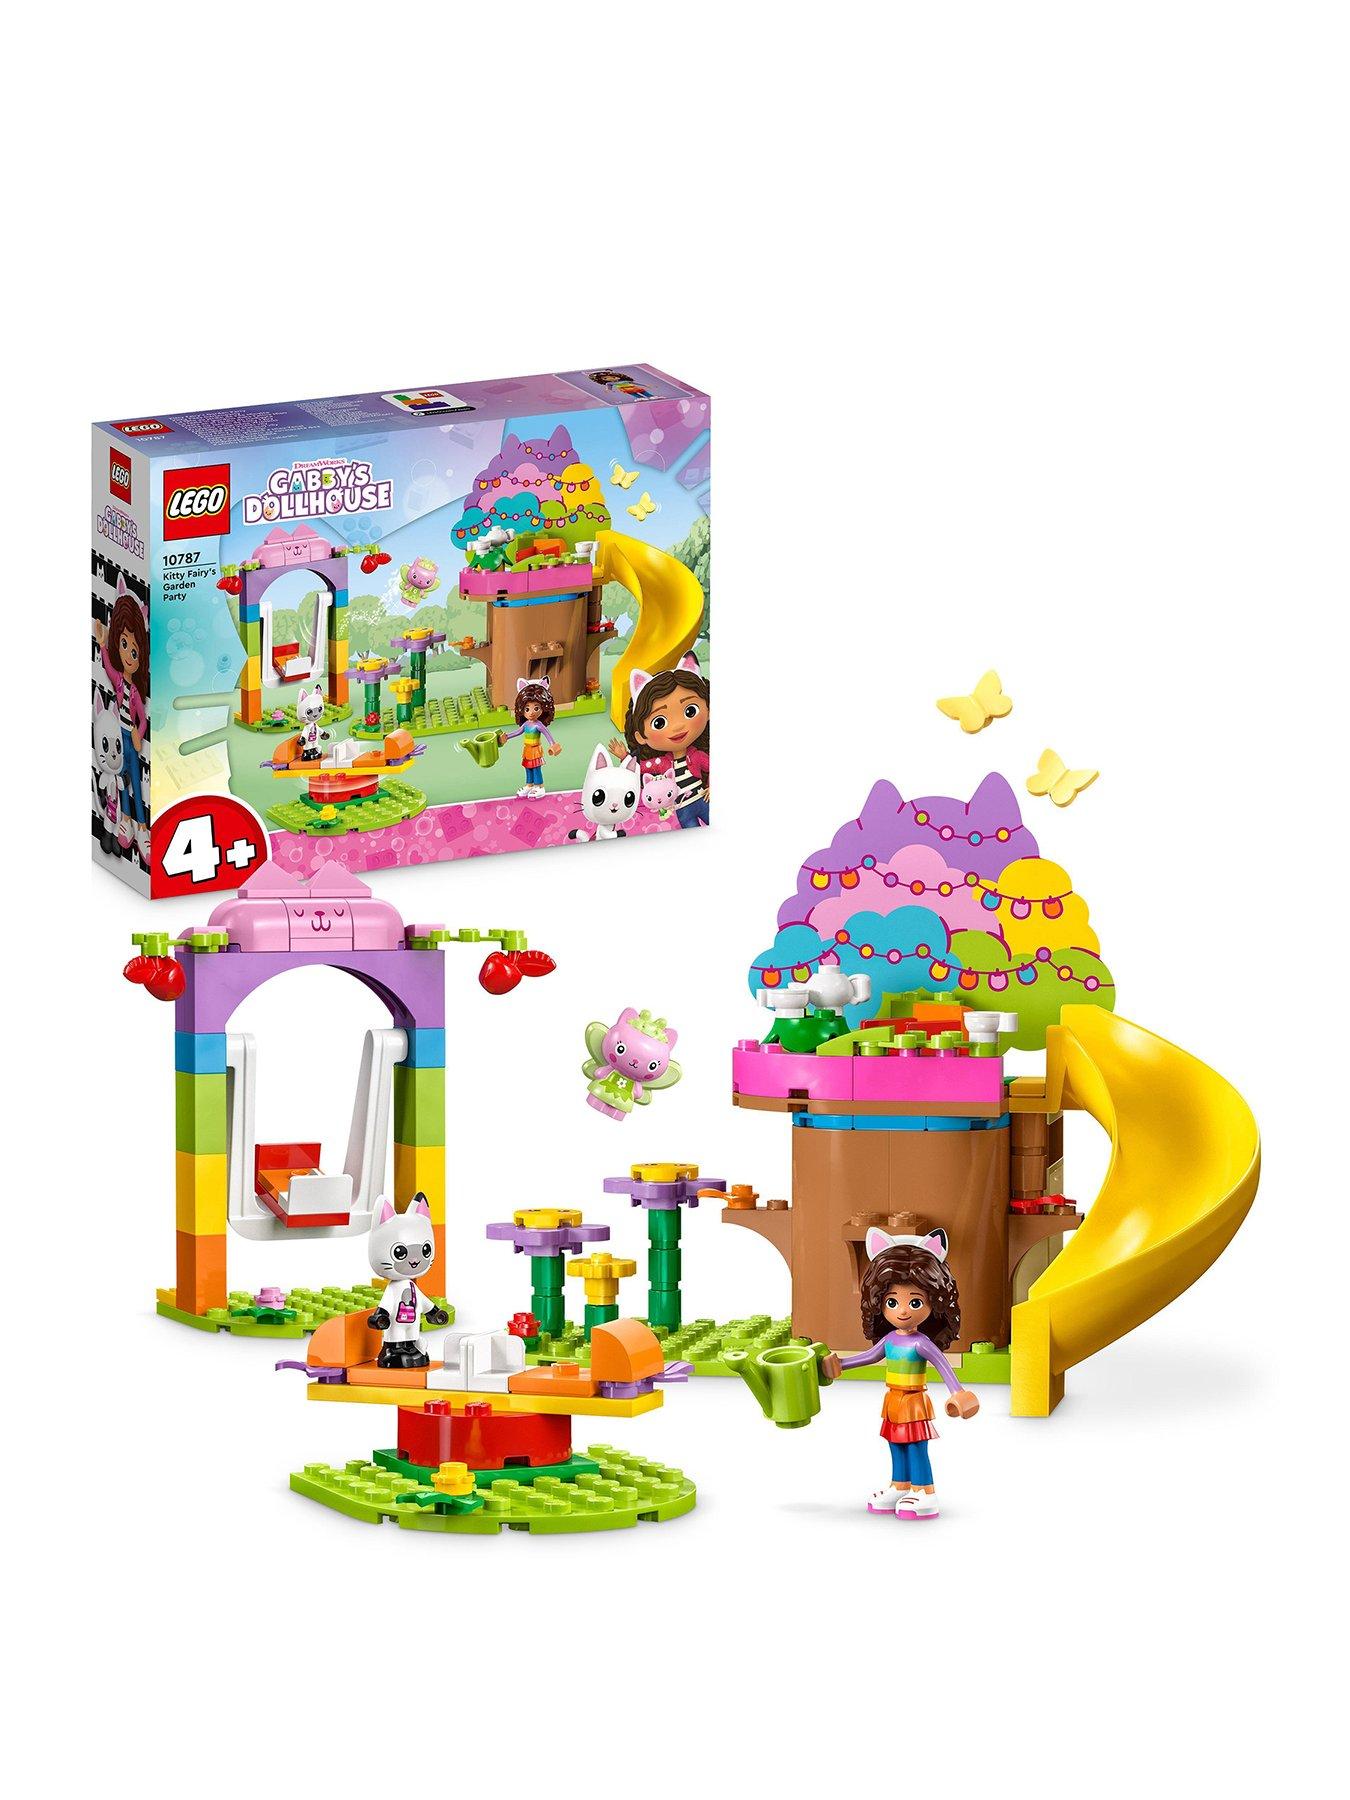 LEGO 10785 Gabby's Dollhouse Bakey with Cakey Fun Toy with Gabby and Cakey  Cat Figures, Kitchen Playset with Cupcake to Decorate plus Accessories